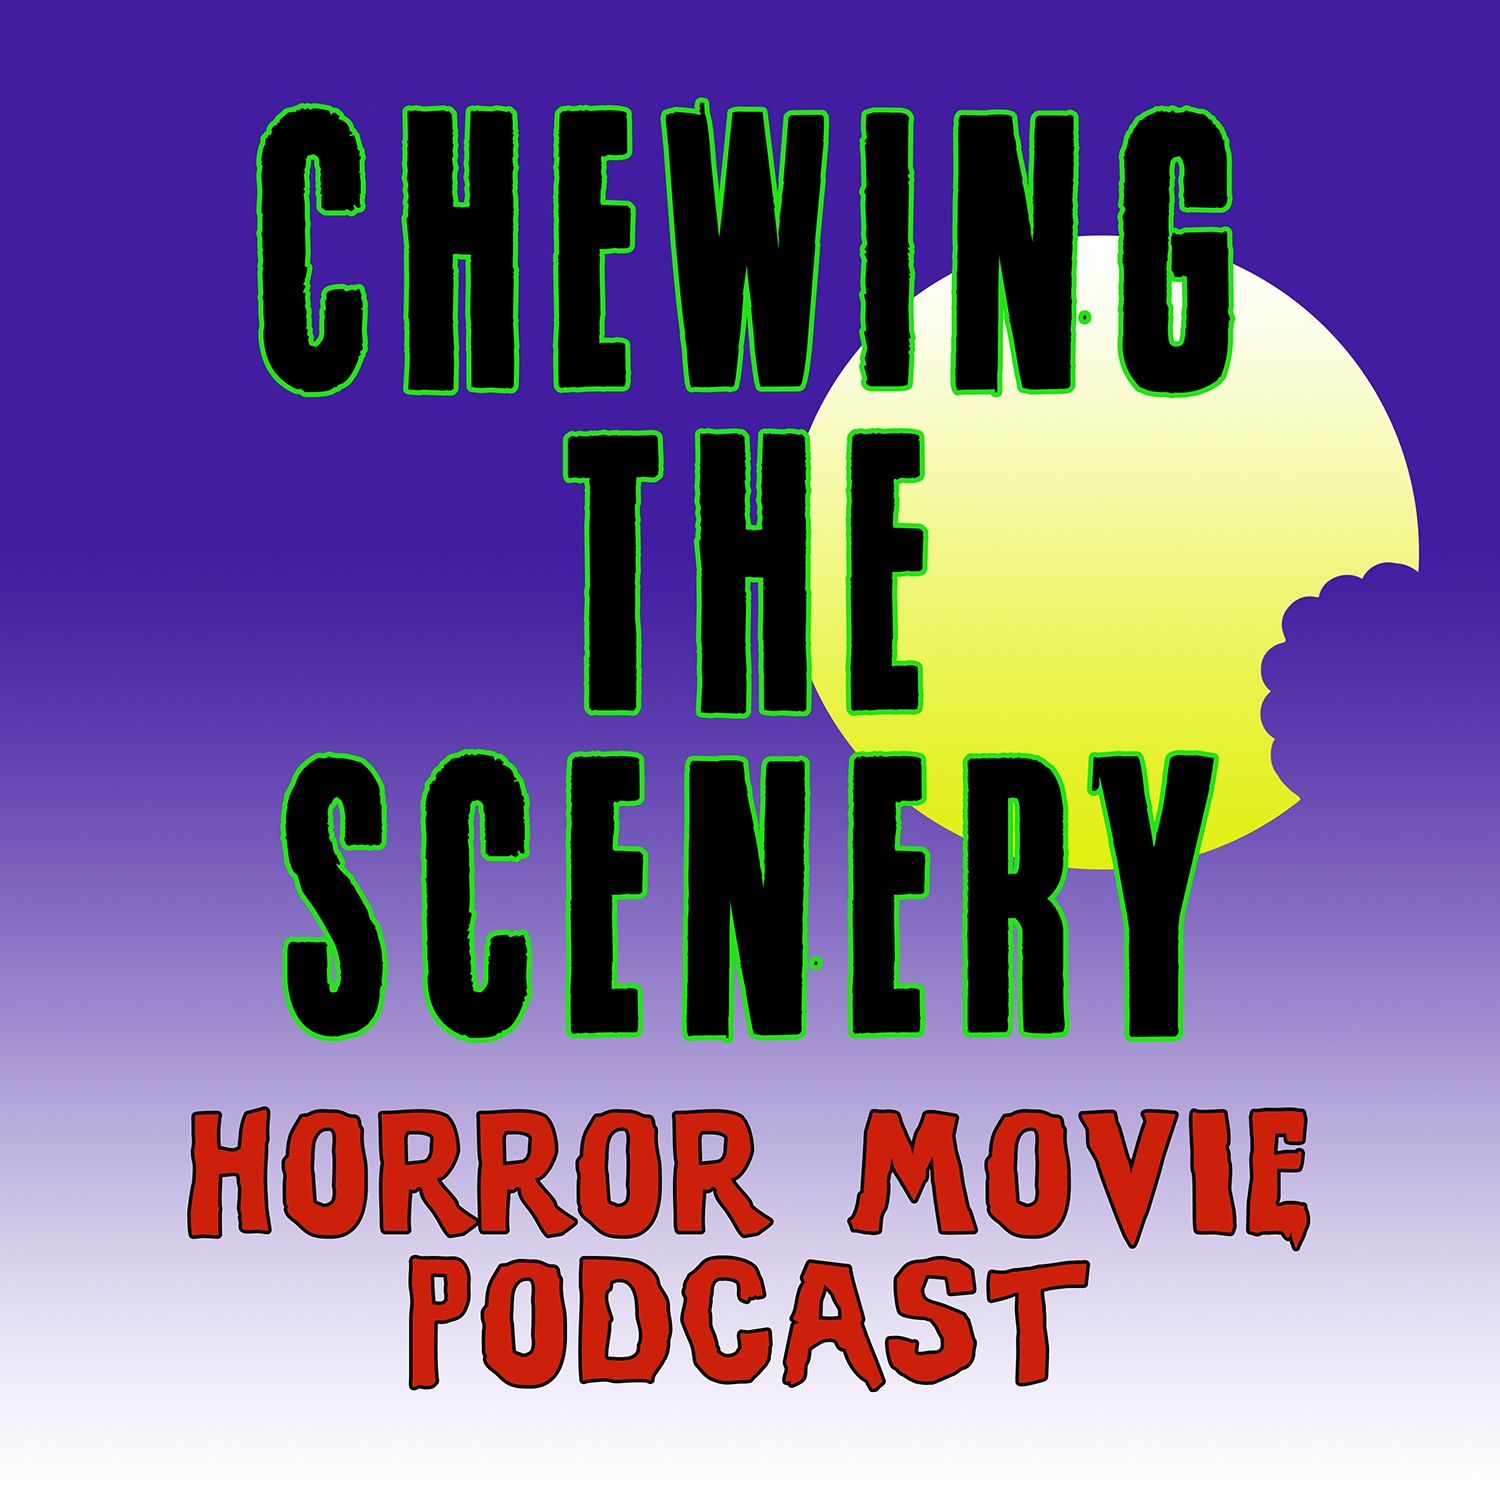 Chewing the Scenery Horror Movie Podcast